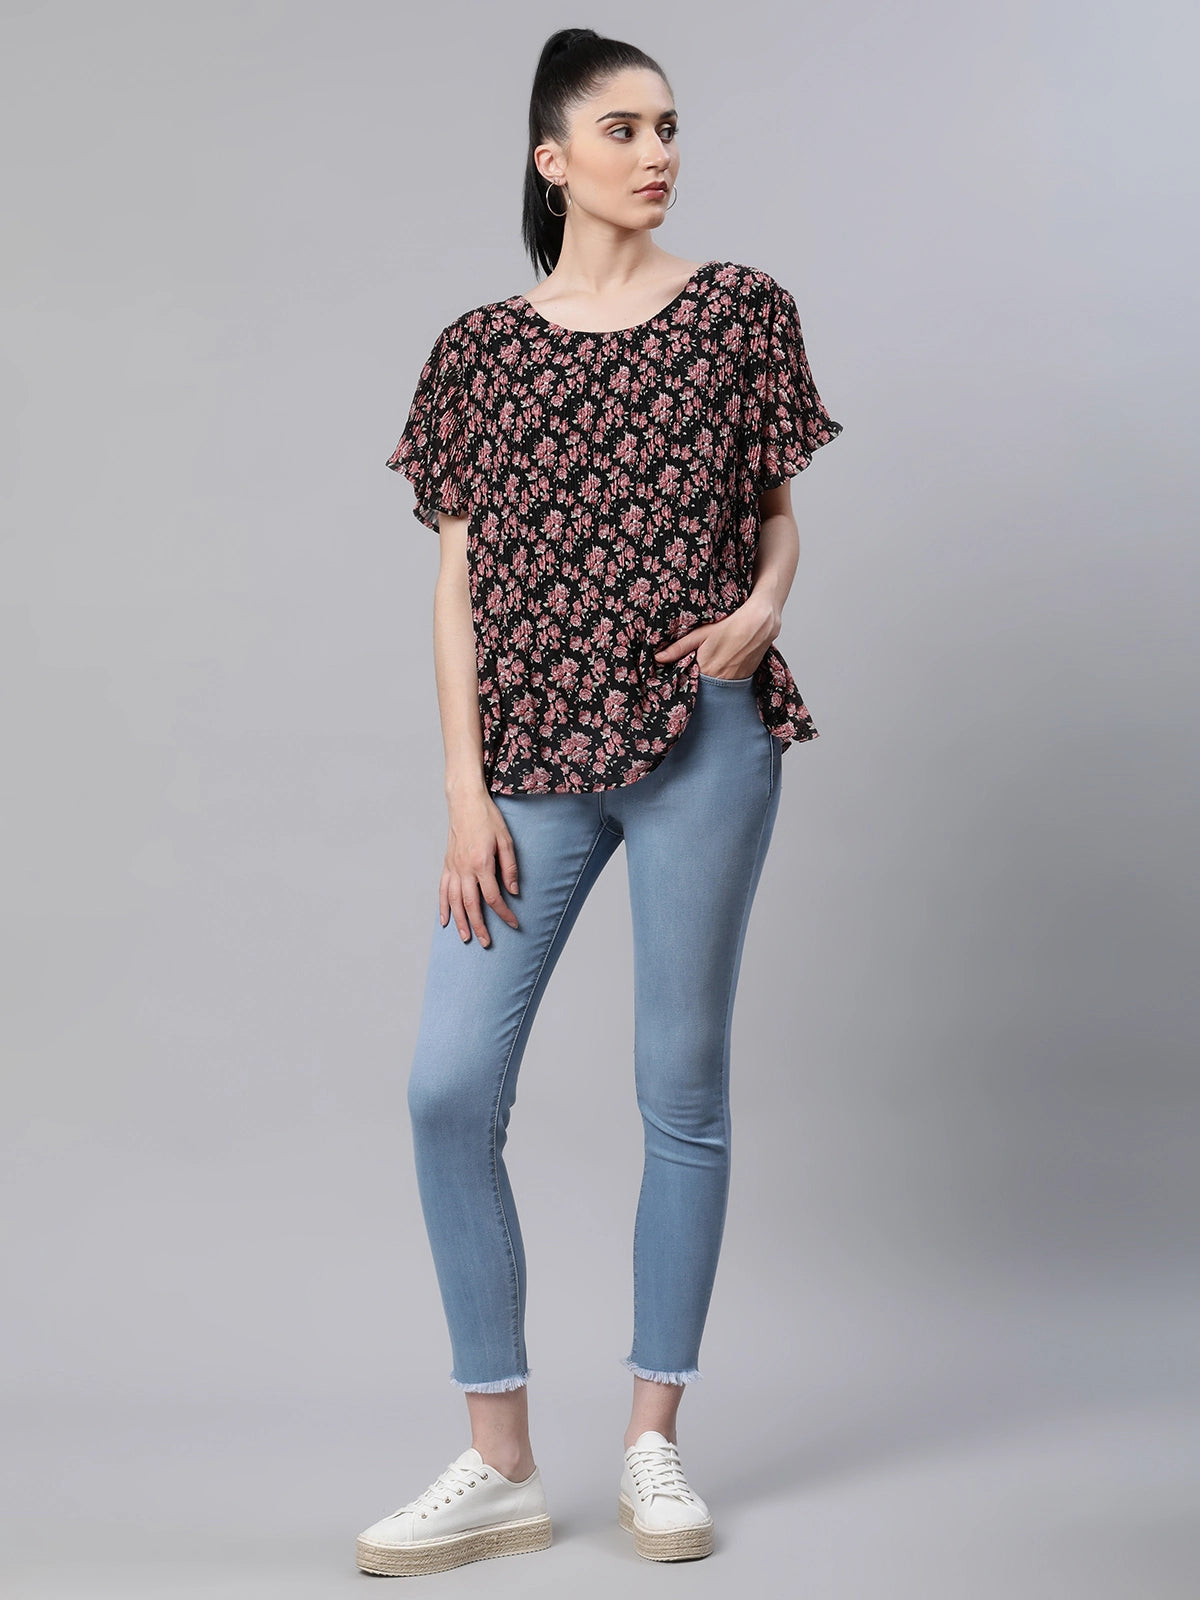 Women Floral Printed Black Loose Fit Party Blouse